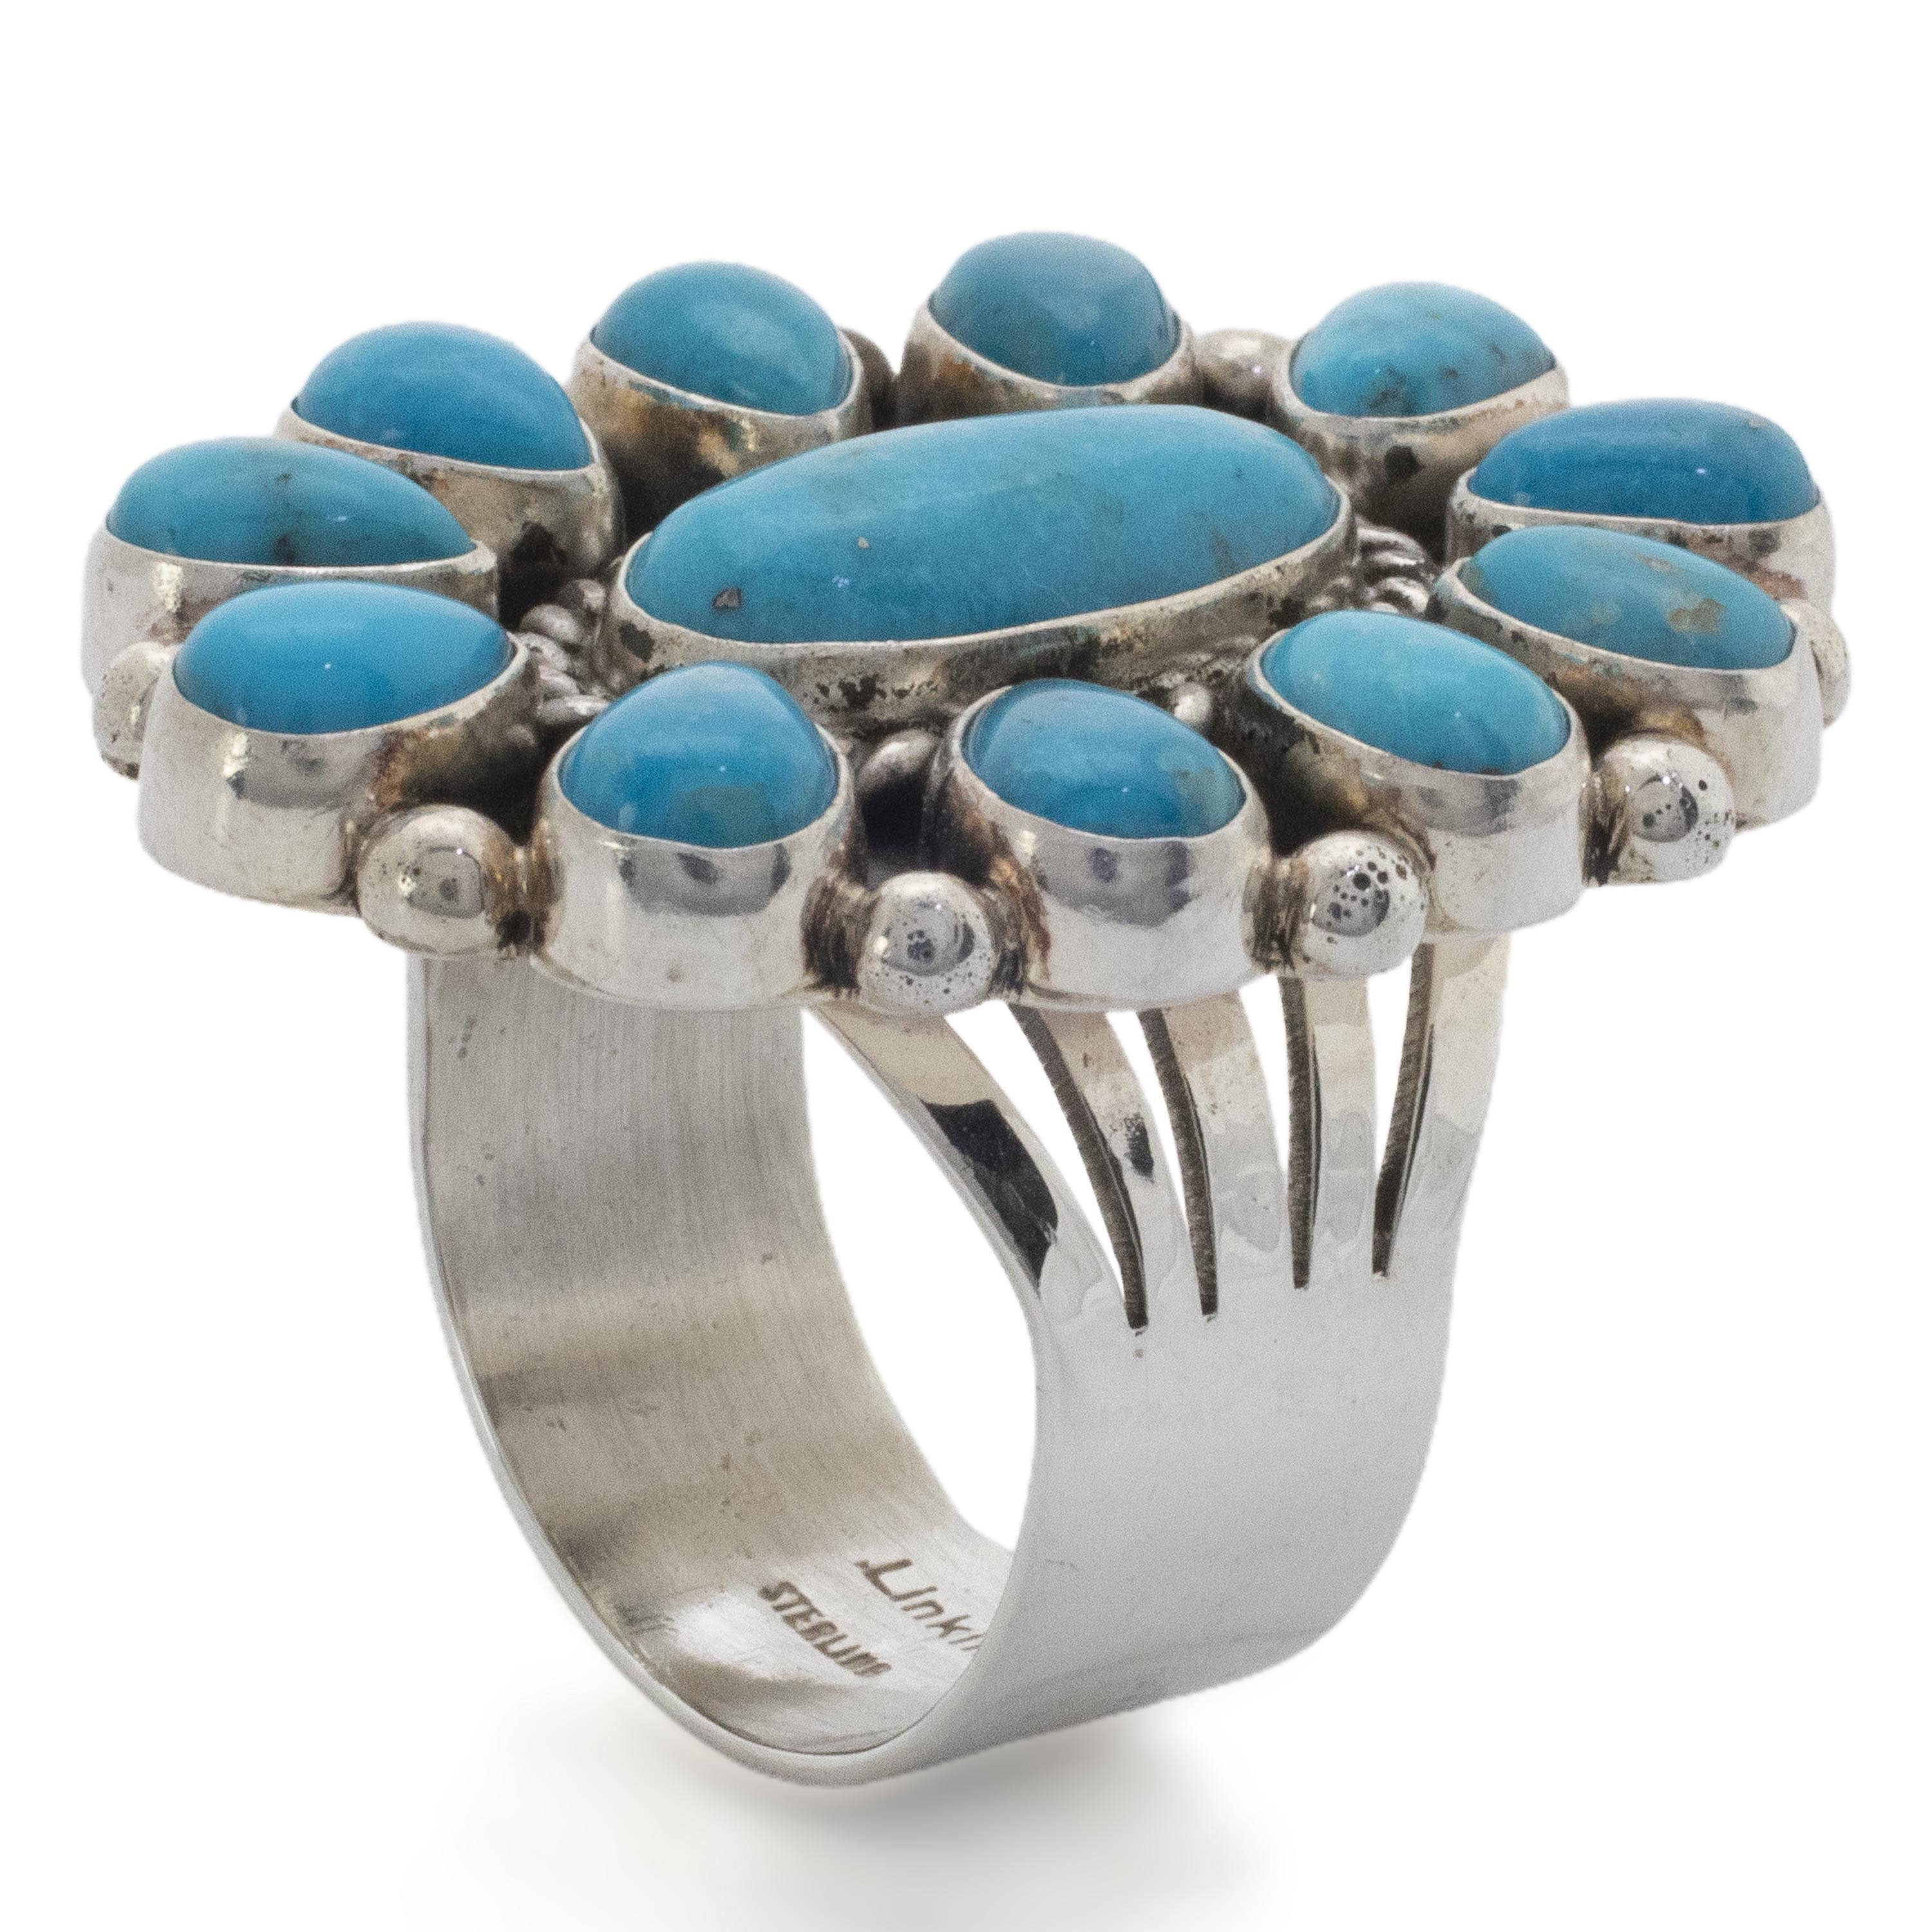 Kalifano Native American Jewelry 10.5 Lucinda Linkin Navajo Sonoran Gold Turquoise USA Native American Made 925 Sterling Silver Ring NAR1400.019.105